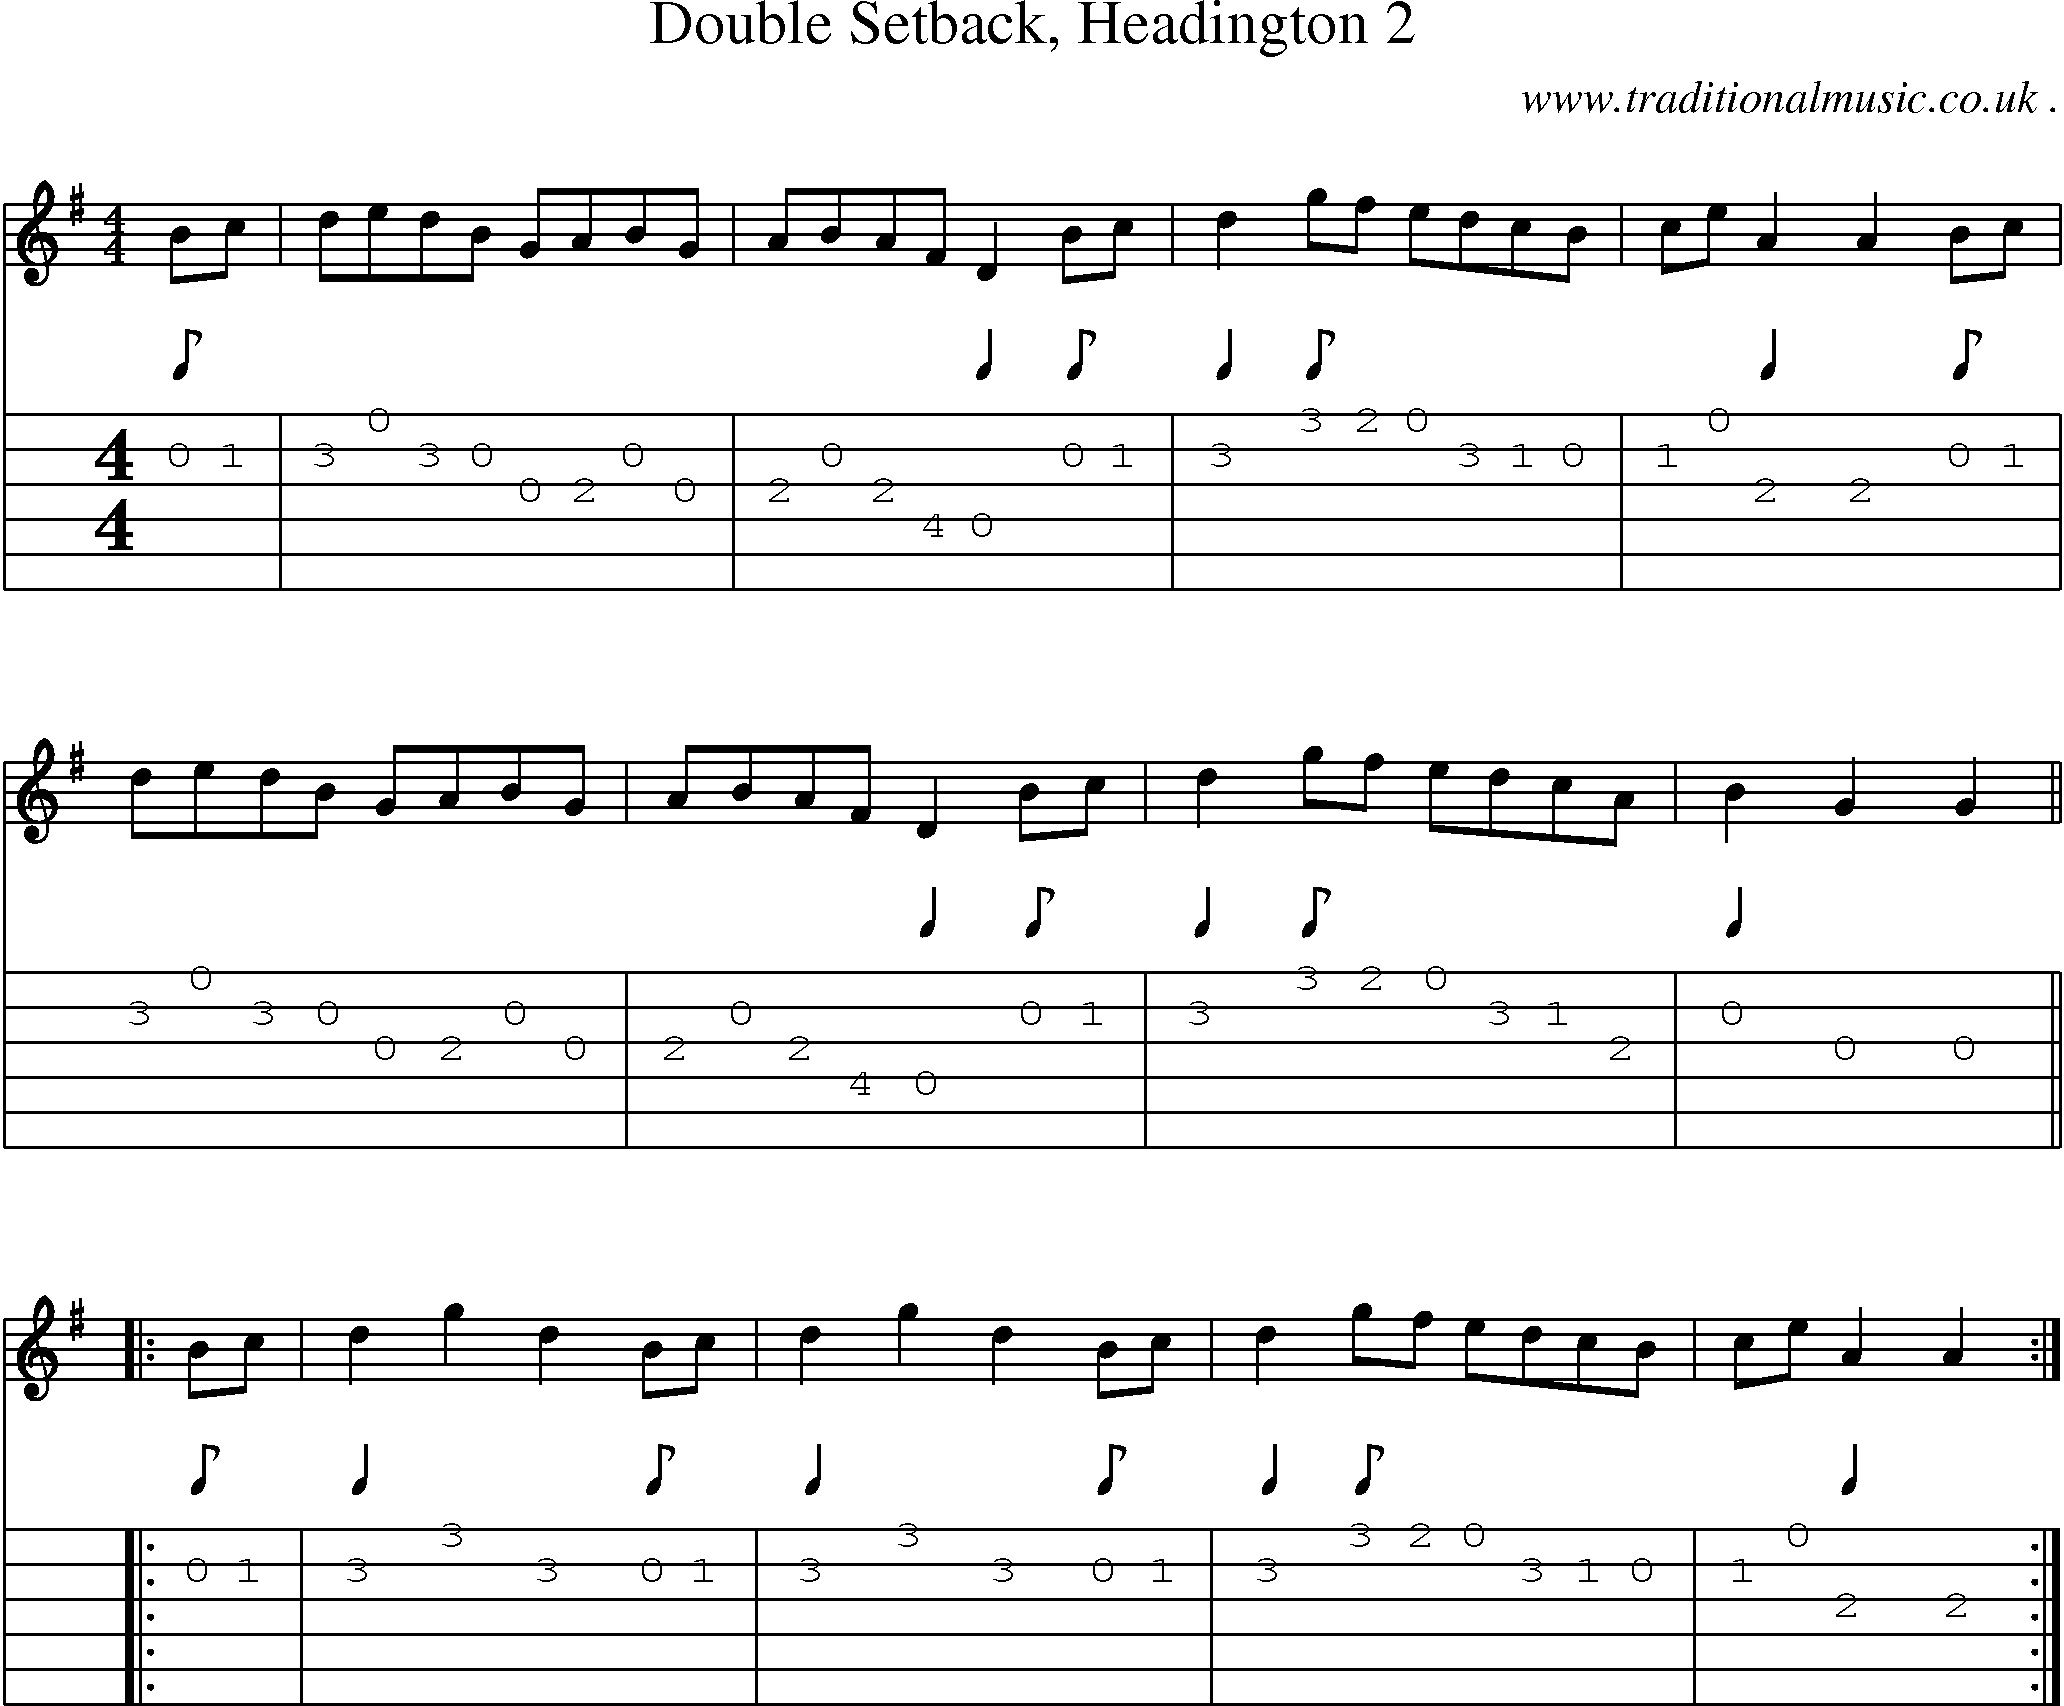 Sheet-Music and Guitar Tabs for Double Setback Headington 2